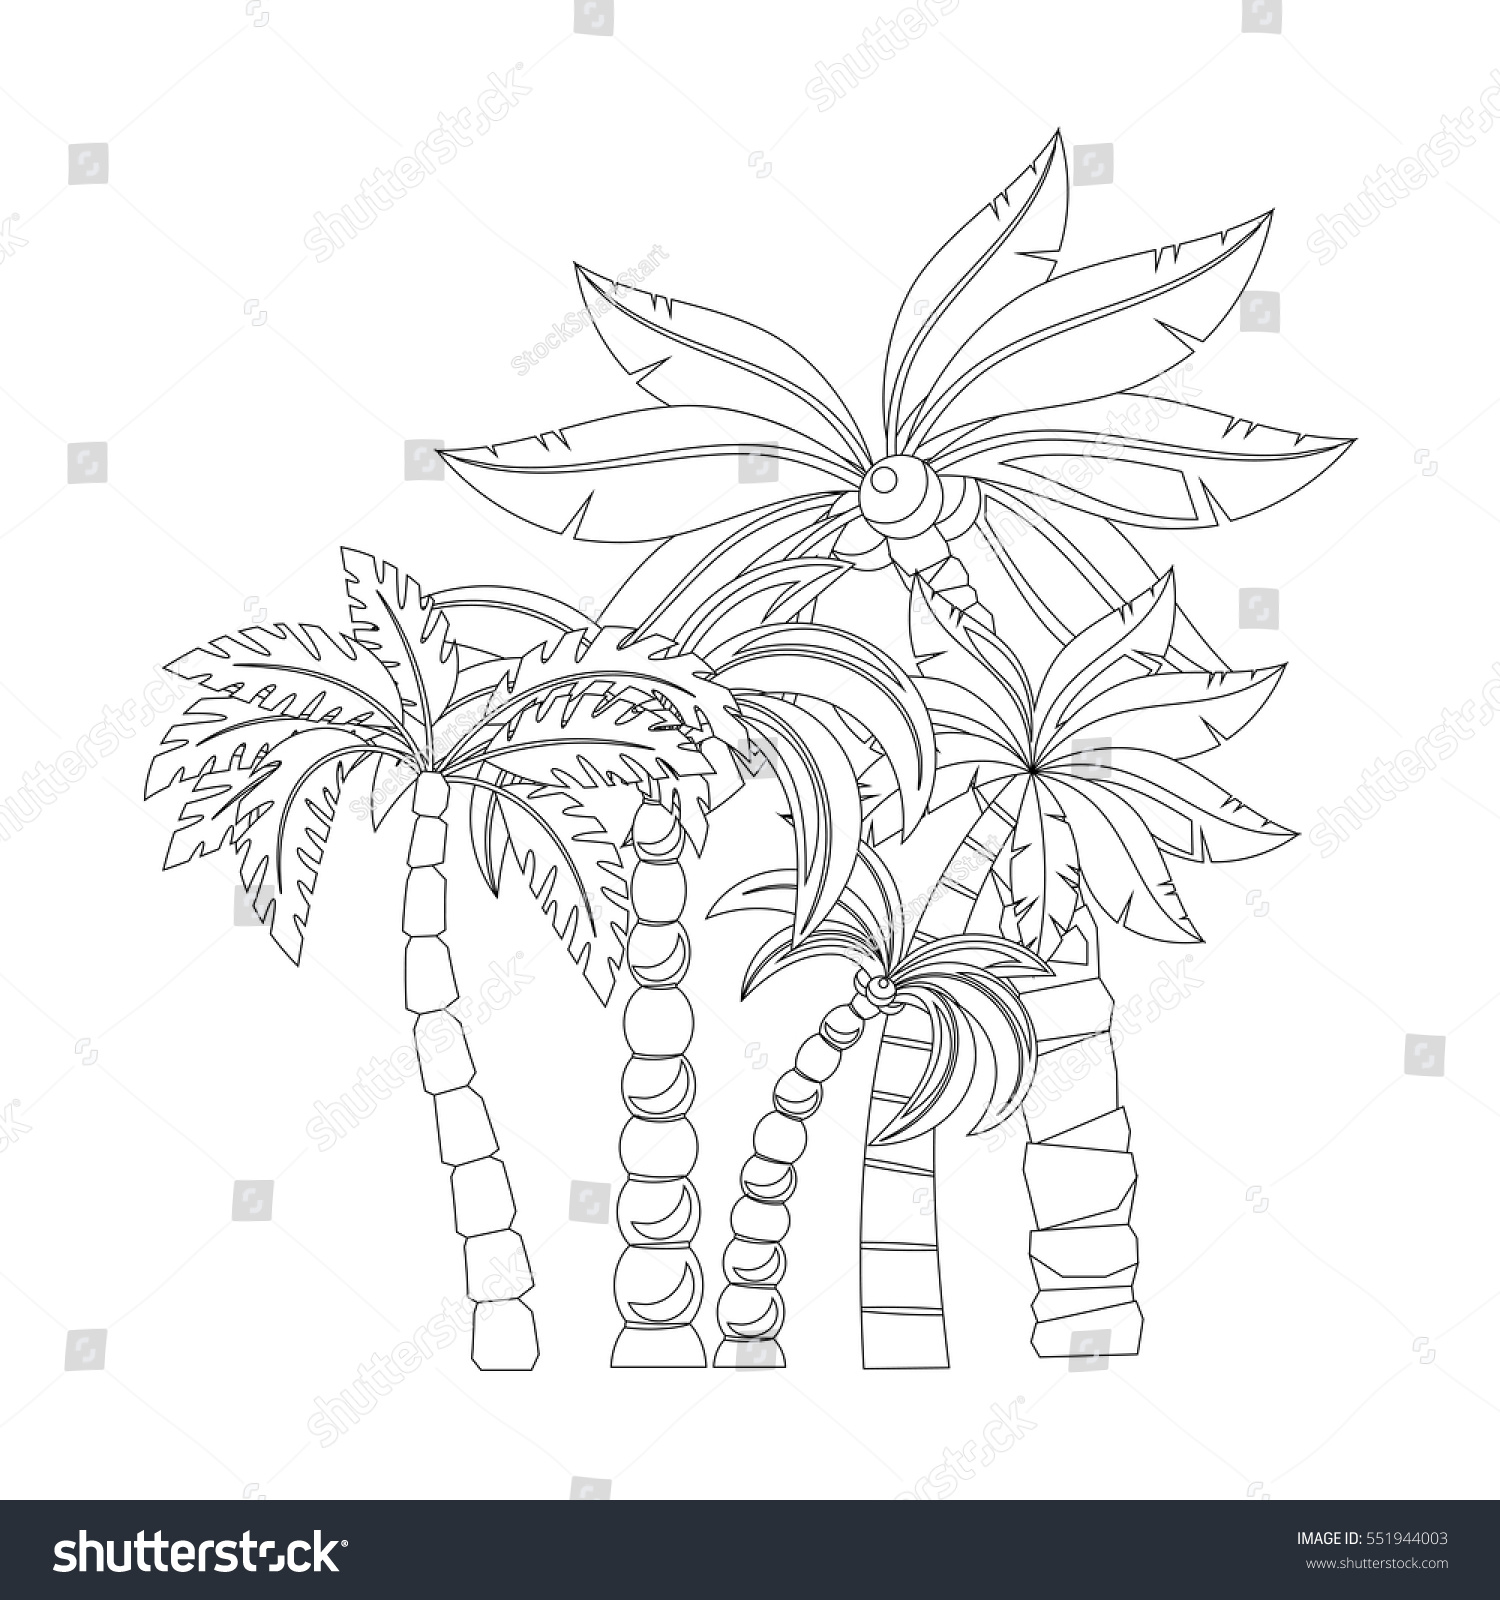 Palm Trees Coloring Book Pages Design Stock Vector 551944003 Isolated